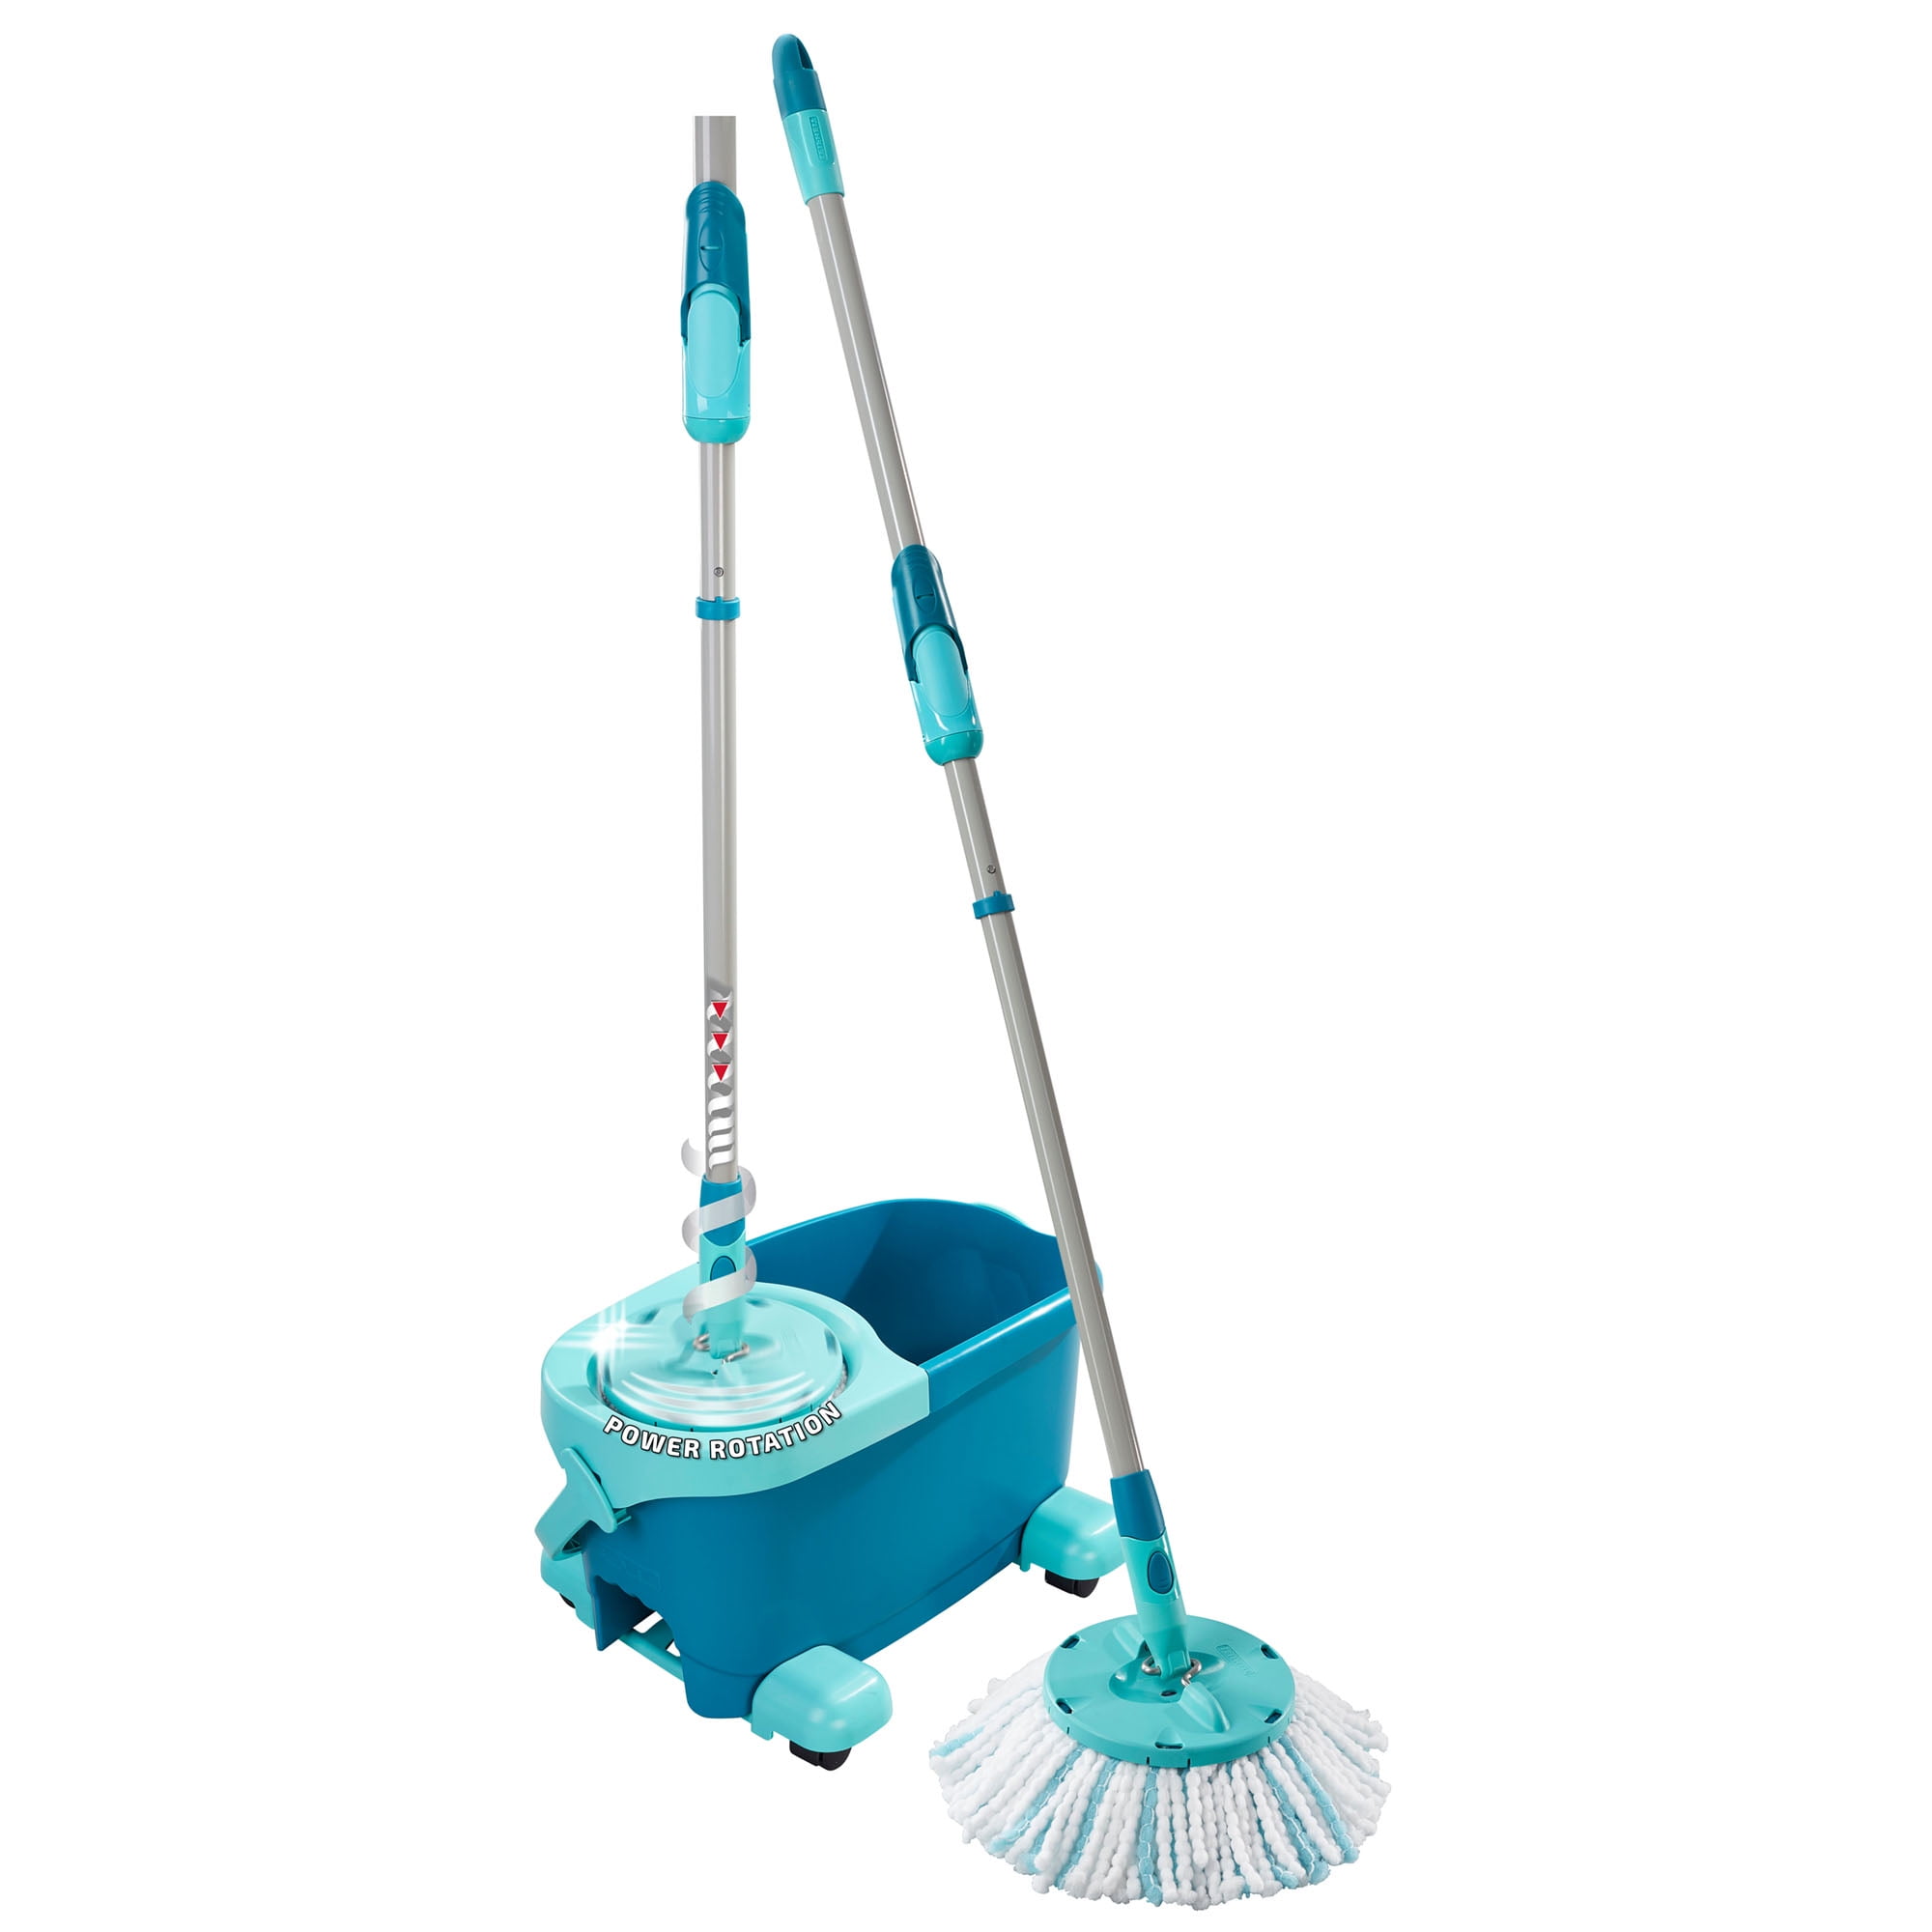  Leifheit Clean Twist M Ergo Mop and Bucket Set, Mop 33 cm Wide,  Moisture Controlled Spin, Faster Cleaning Spin mop, Easy-Steer Micro Fibre  Head with 360° Joint, Twist Mop : Health